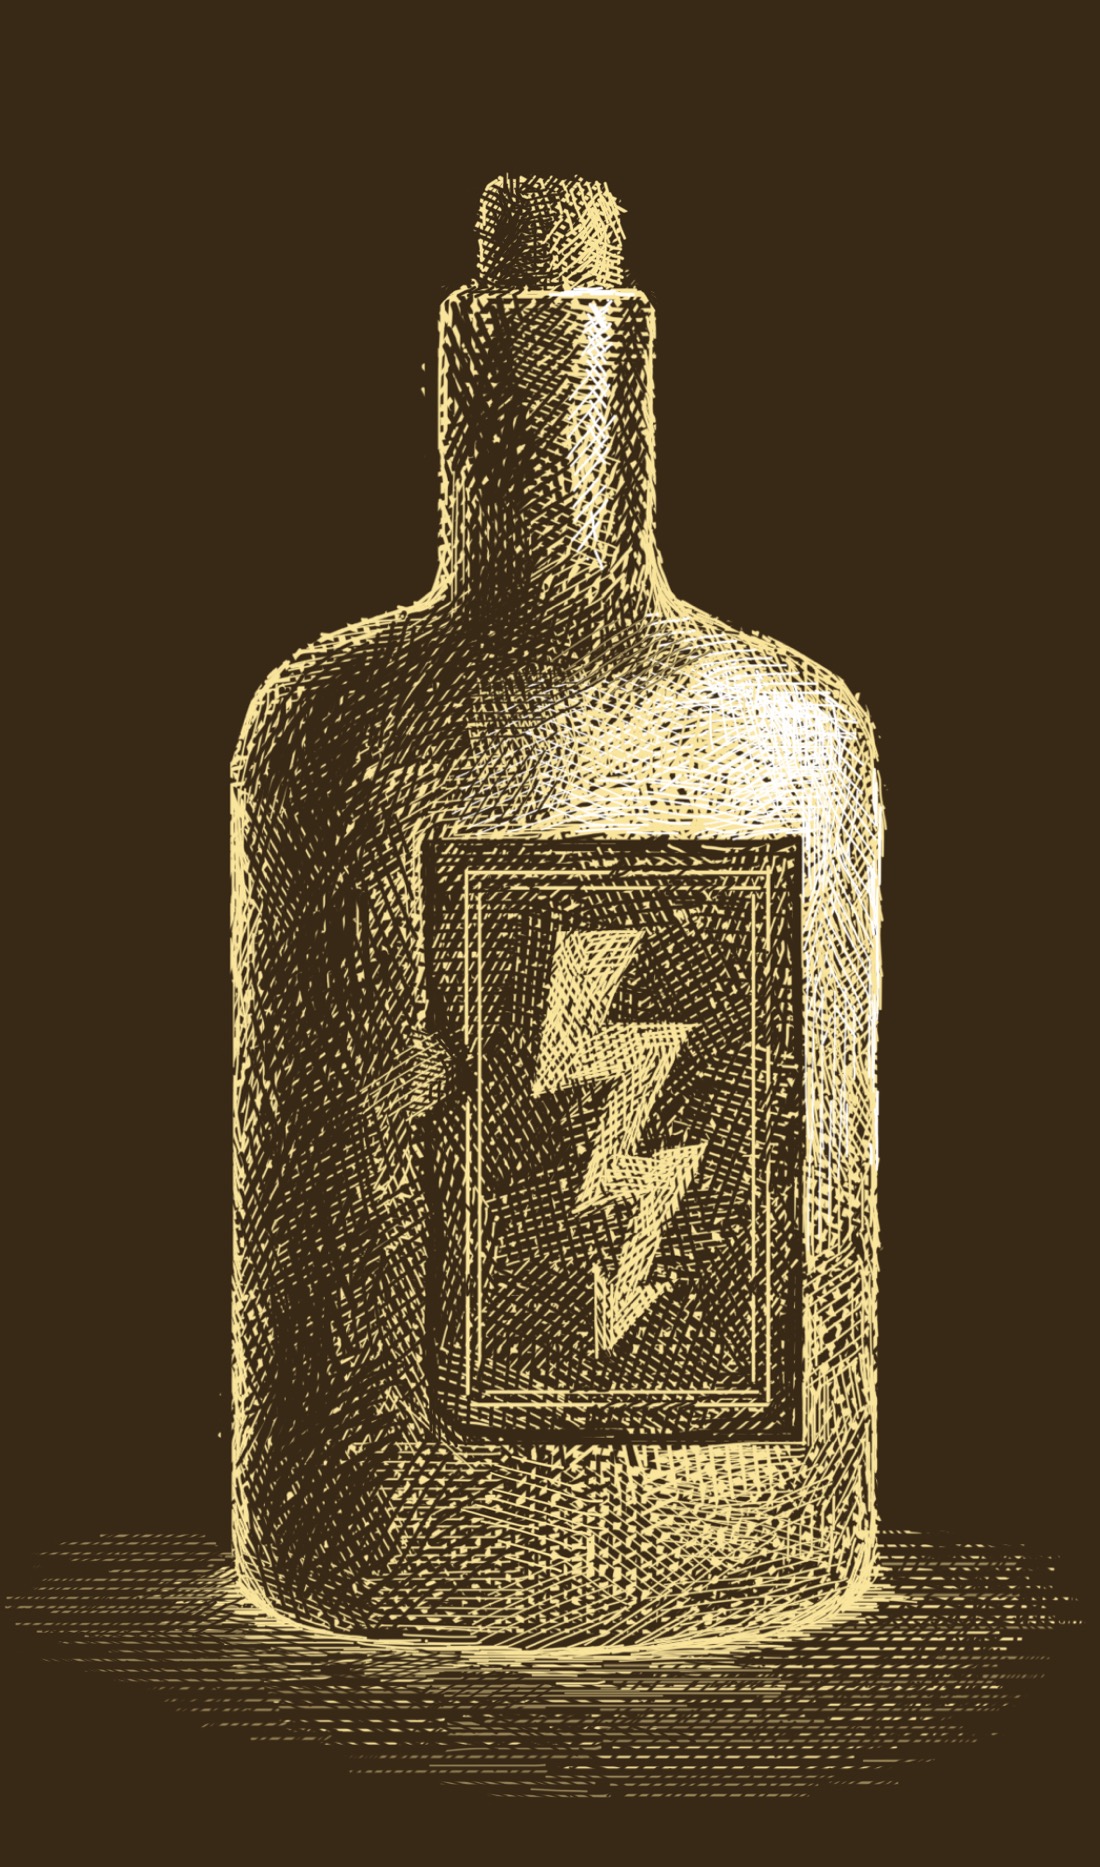 A glass bottle: not perfectly cylindrical, but with flattish front and rear faces and rounded sides. There is a cork in the neck of the bottle. The front face of the bottle has a label on it, slightly frayed and worn. The label has nothing on it except for a high voltage symbol—a lightning-bolt-shaped arrow—contained in a double border.